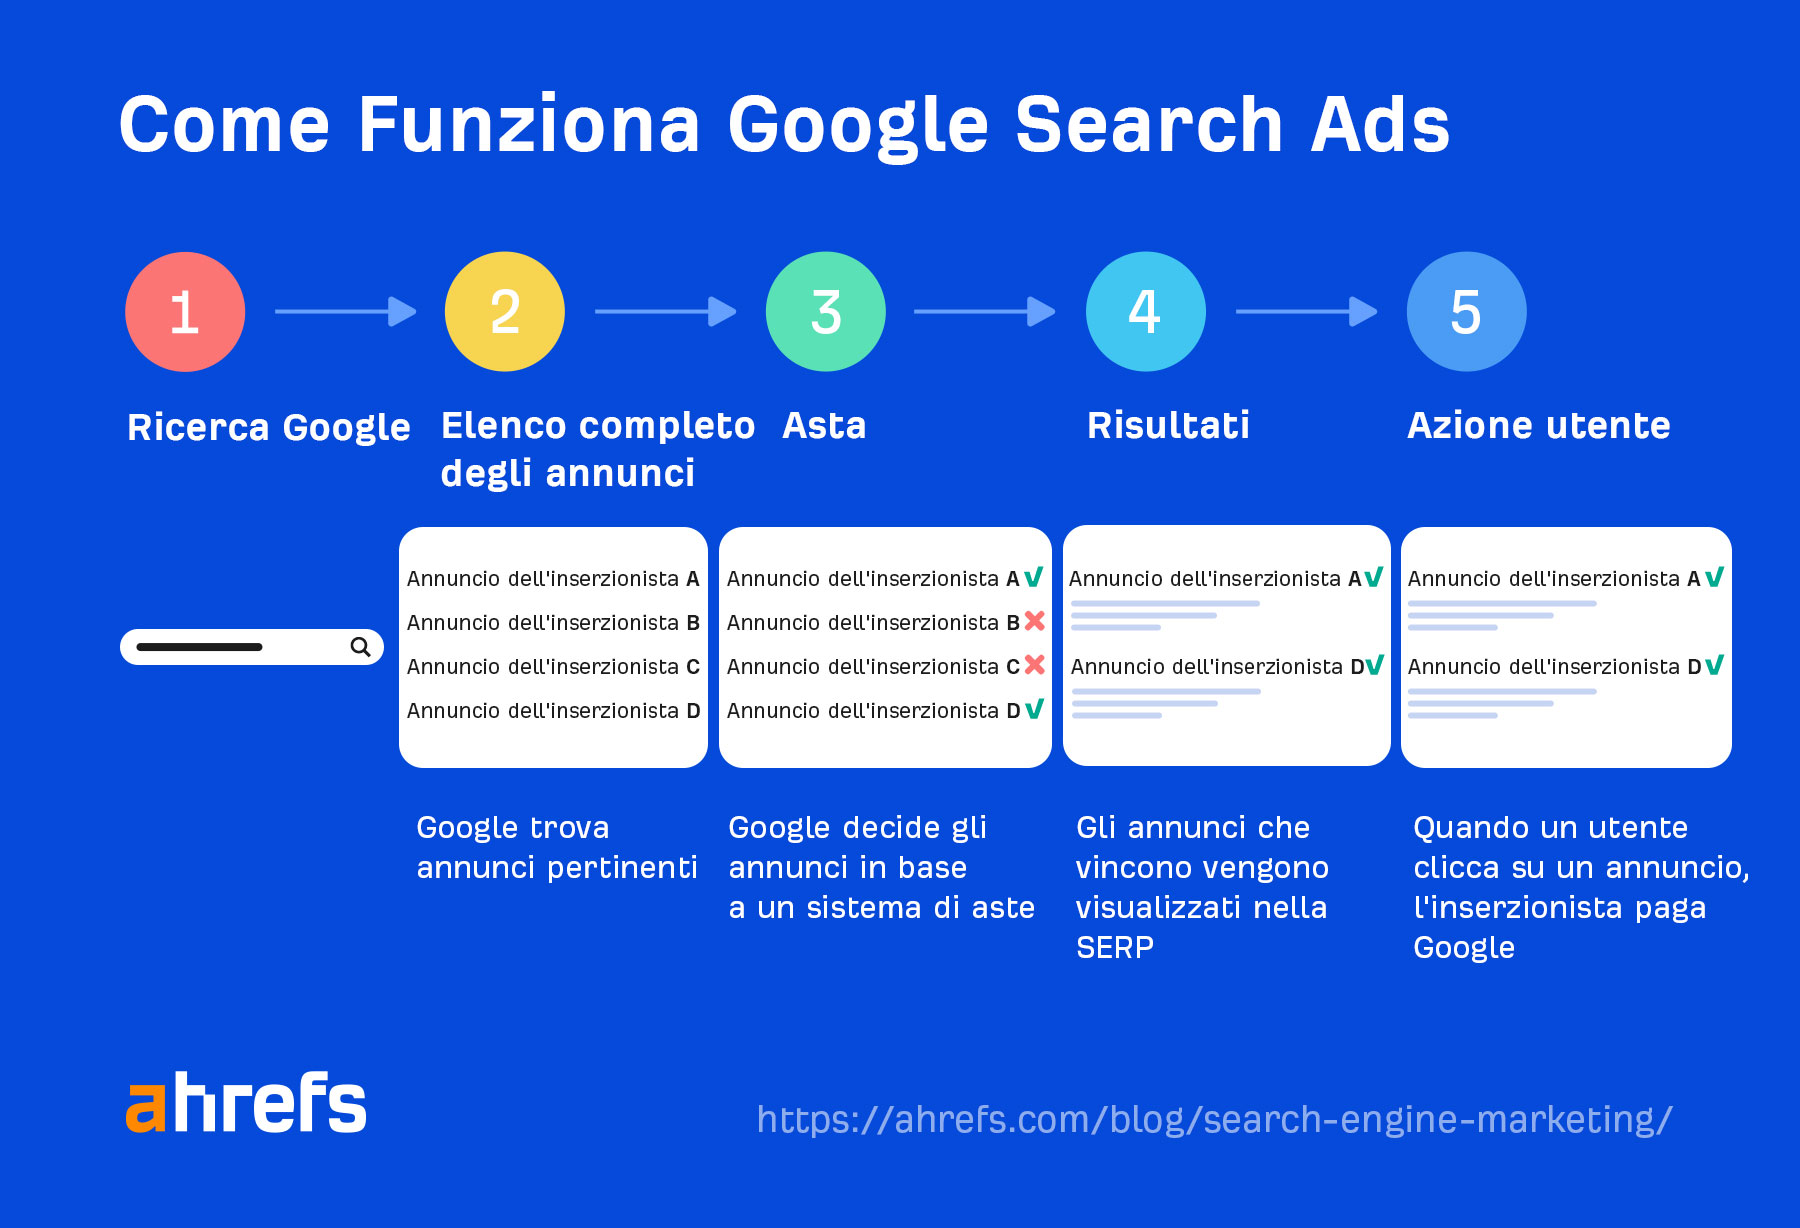 How Google Search Ads work step by step